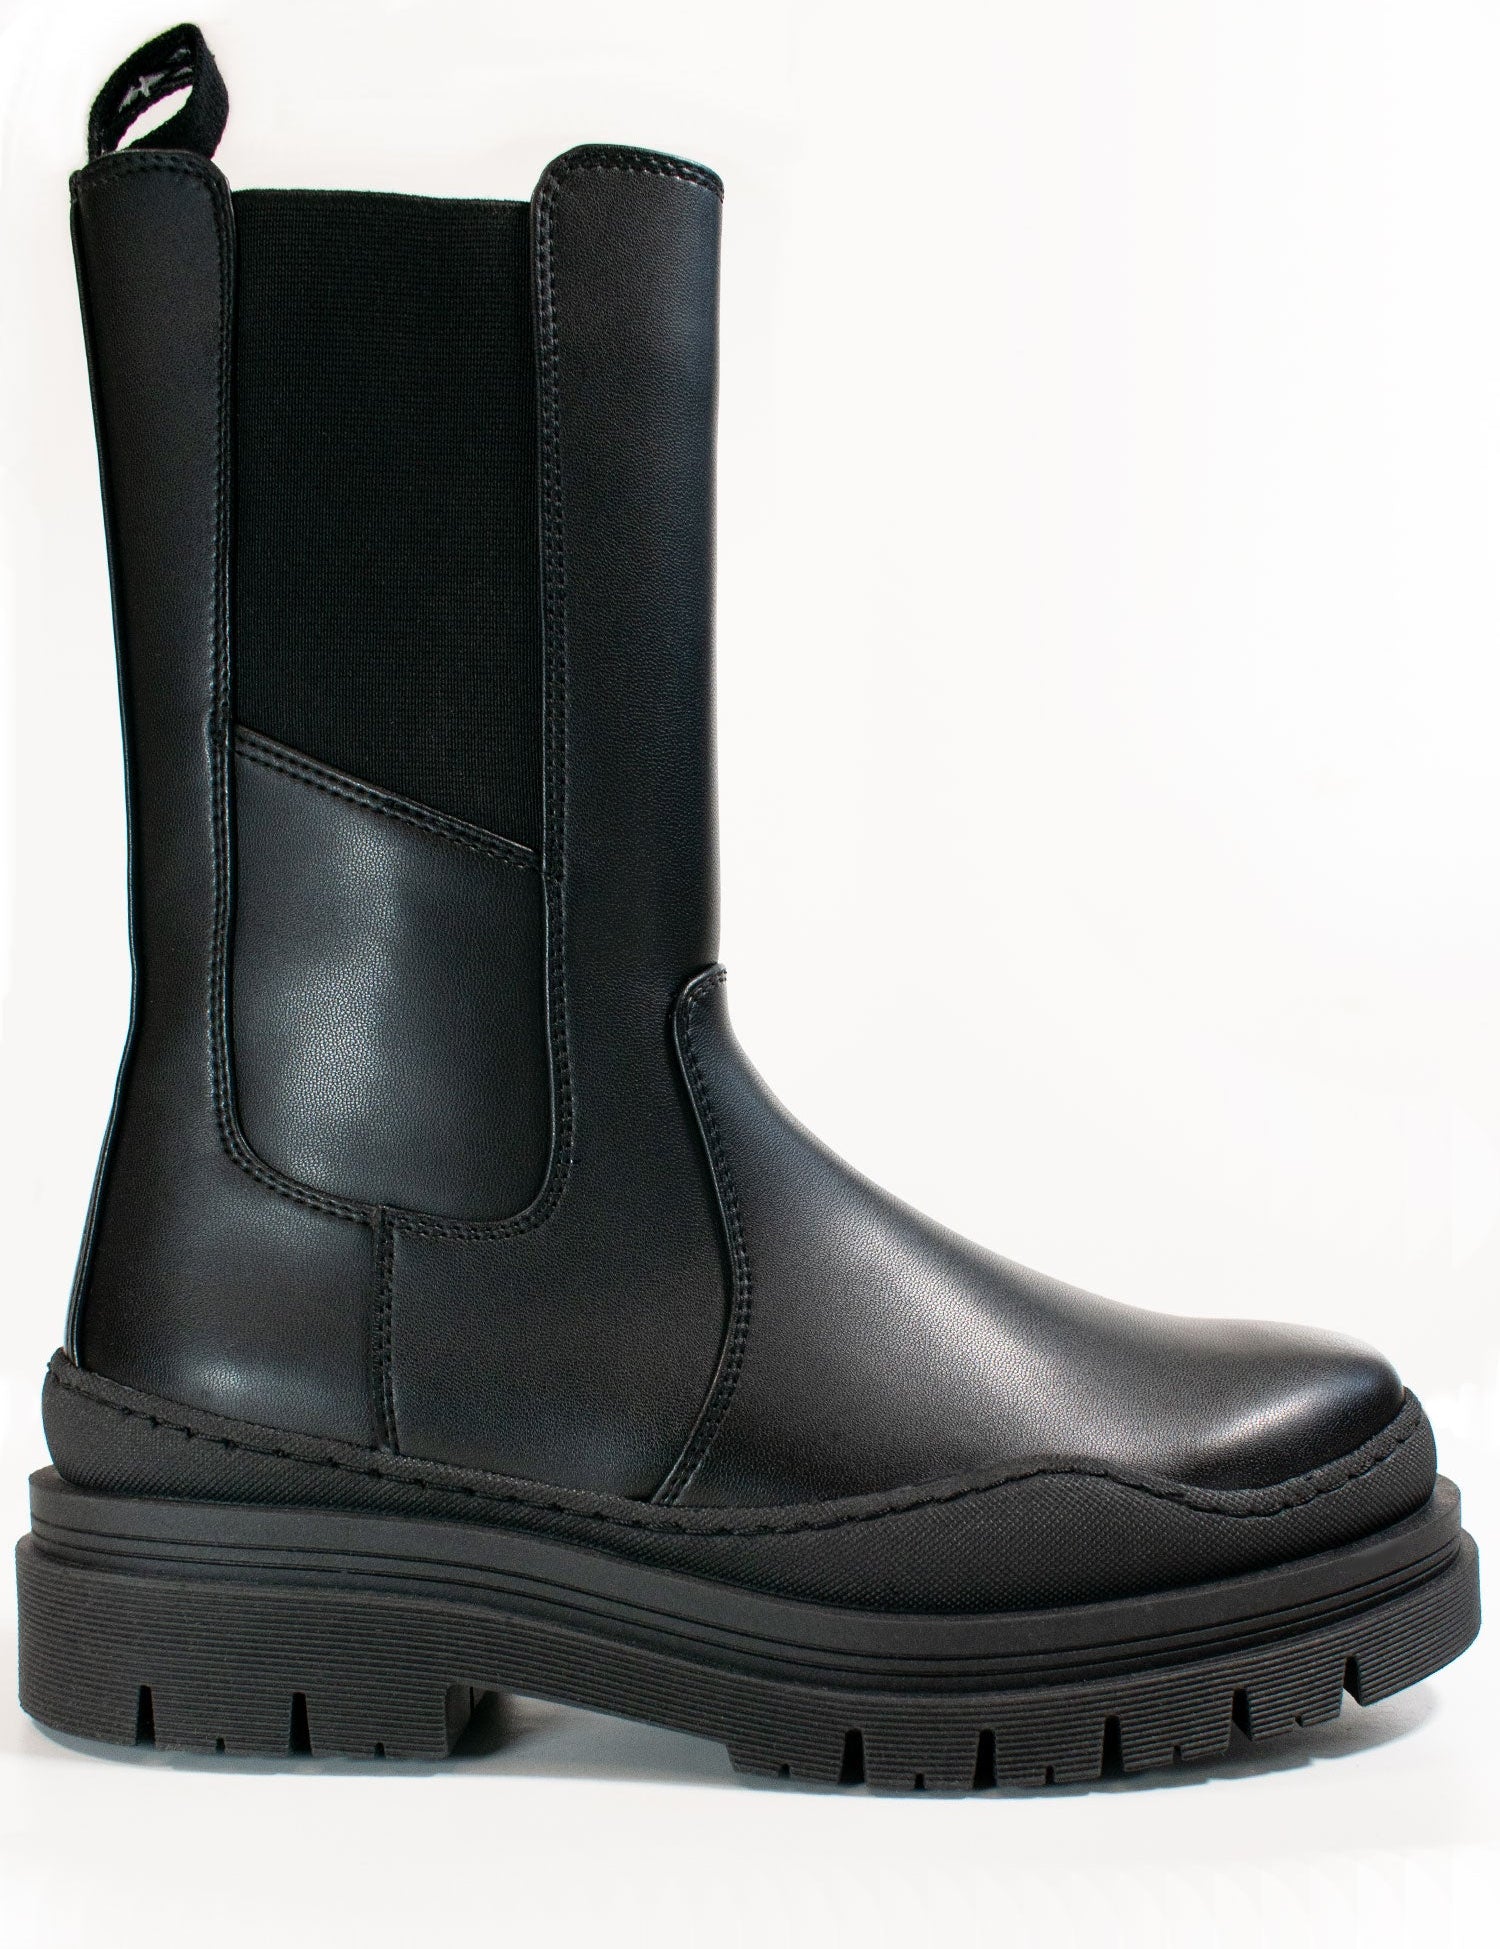 Track-Sole-Chelsea-Mid-Height-Boots-Edited-1_782fd892-ec21-49d1-b5be-e8eb125c439c.jpg